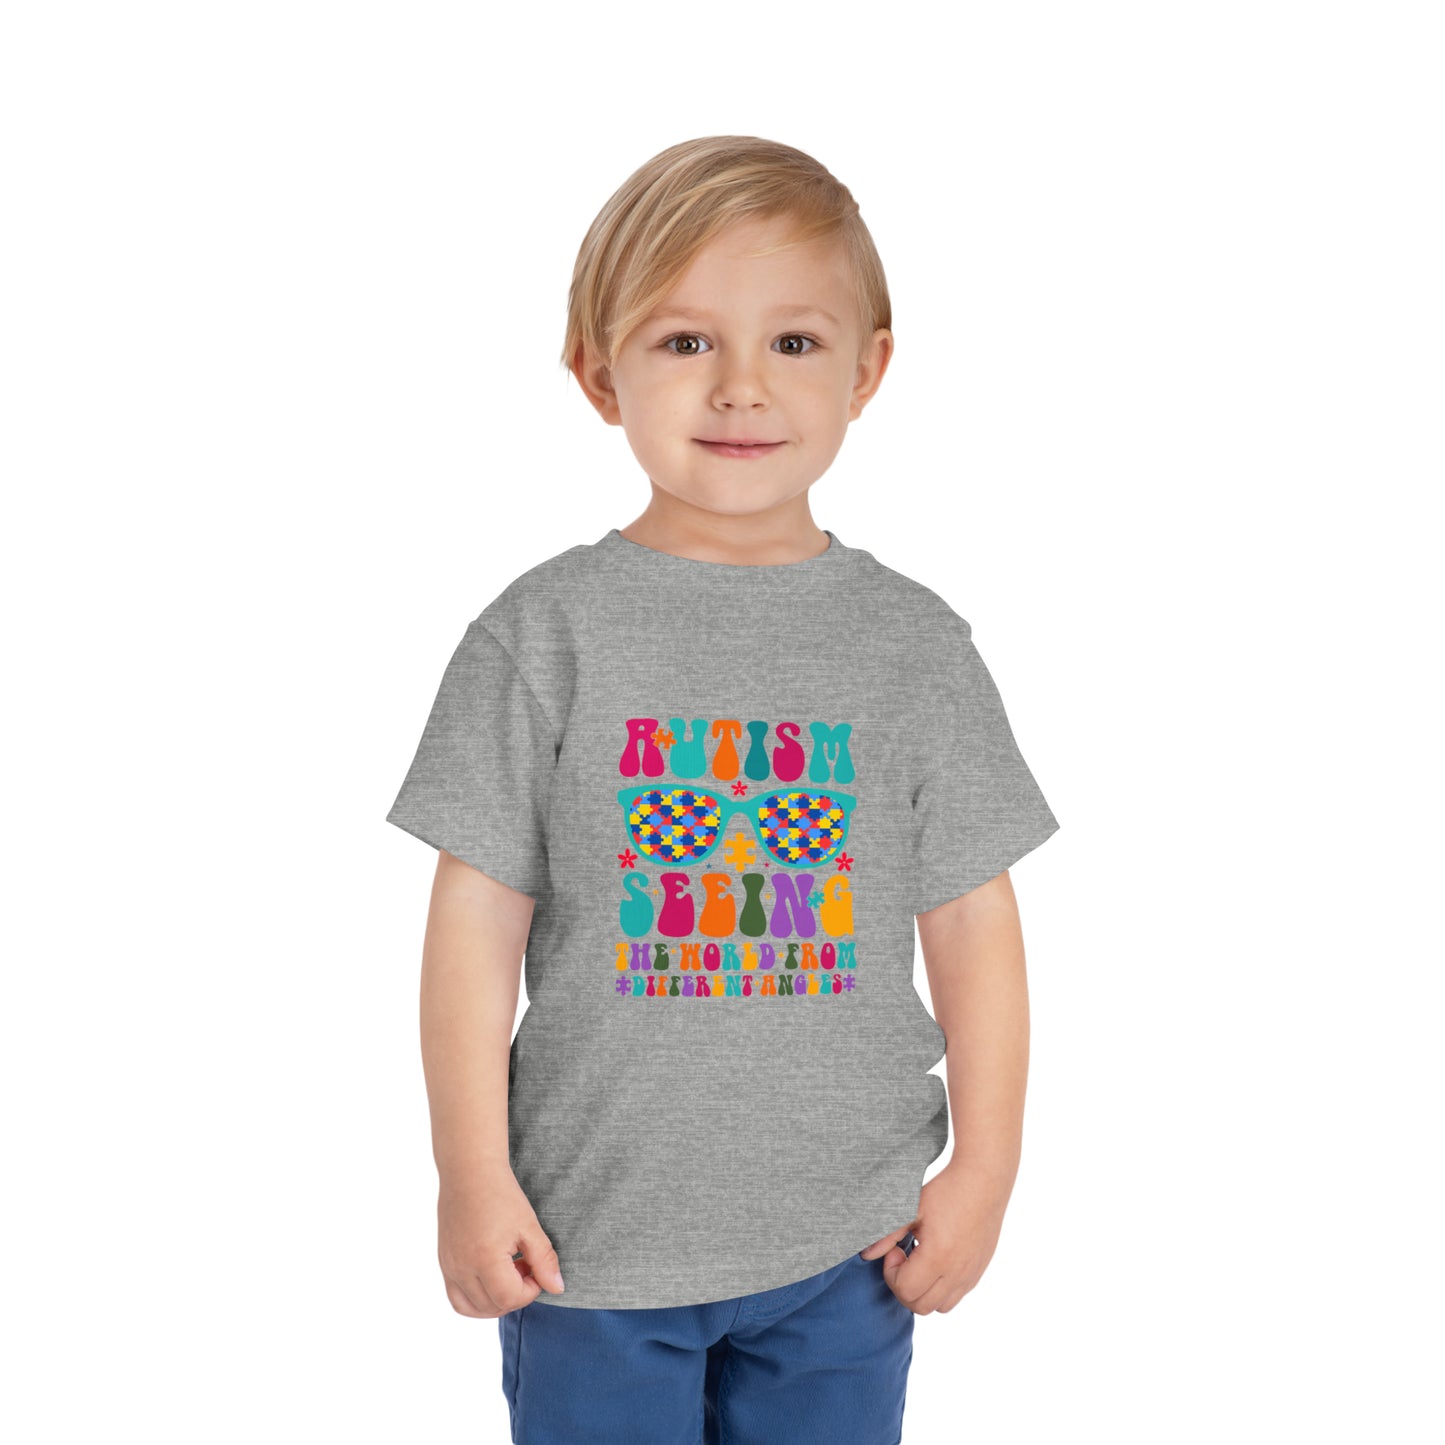 Autism Seeing The World Differently Advocate Toddler Short Sleeve Tee